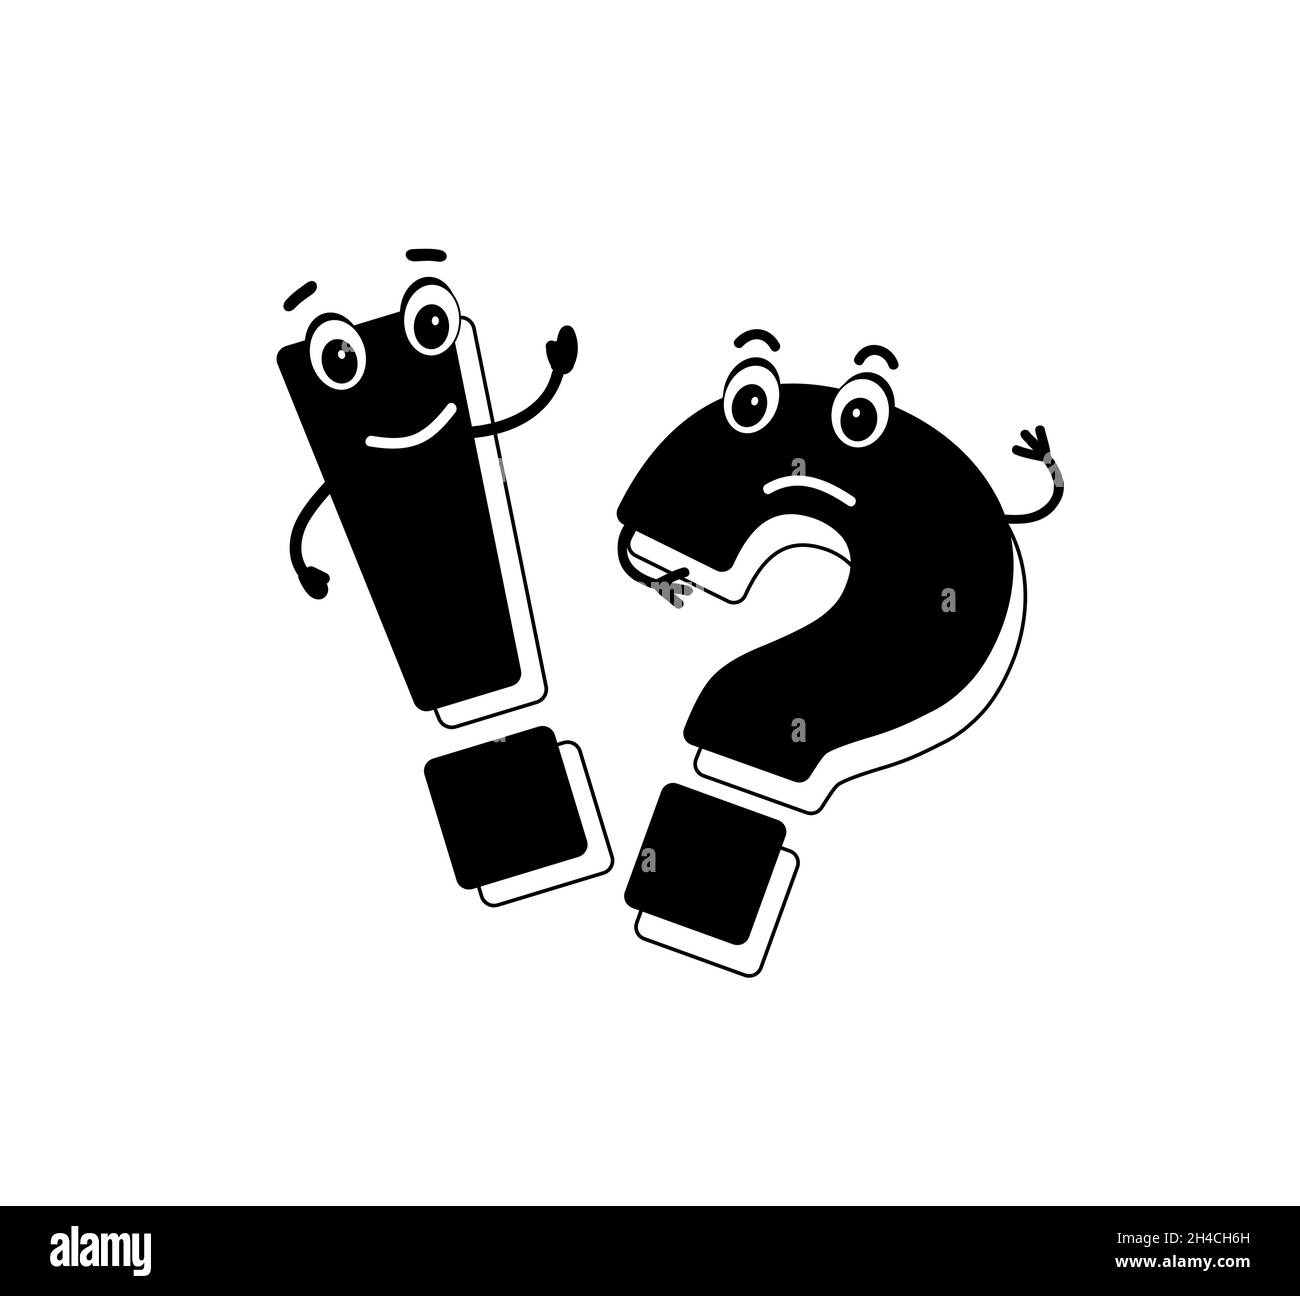 Black Large question mark and exclamation mark. Stock Vector